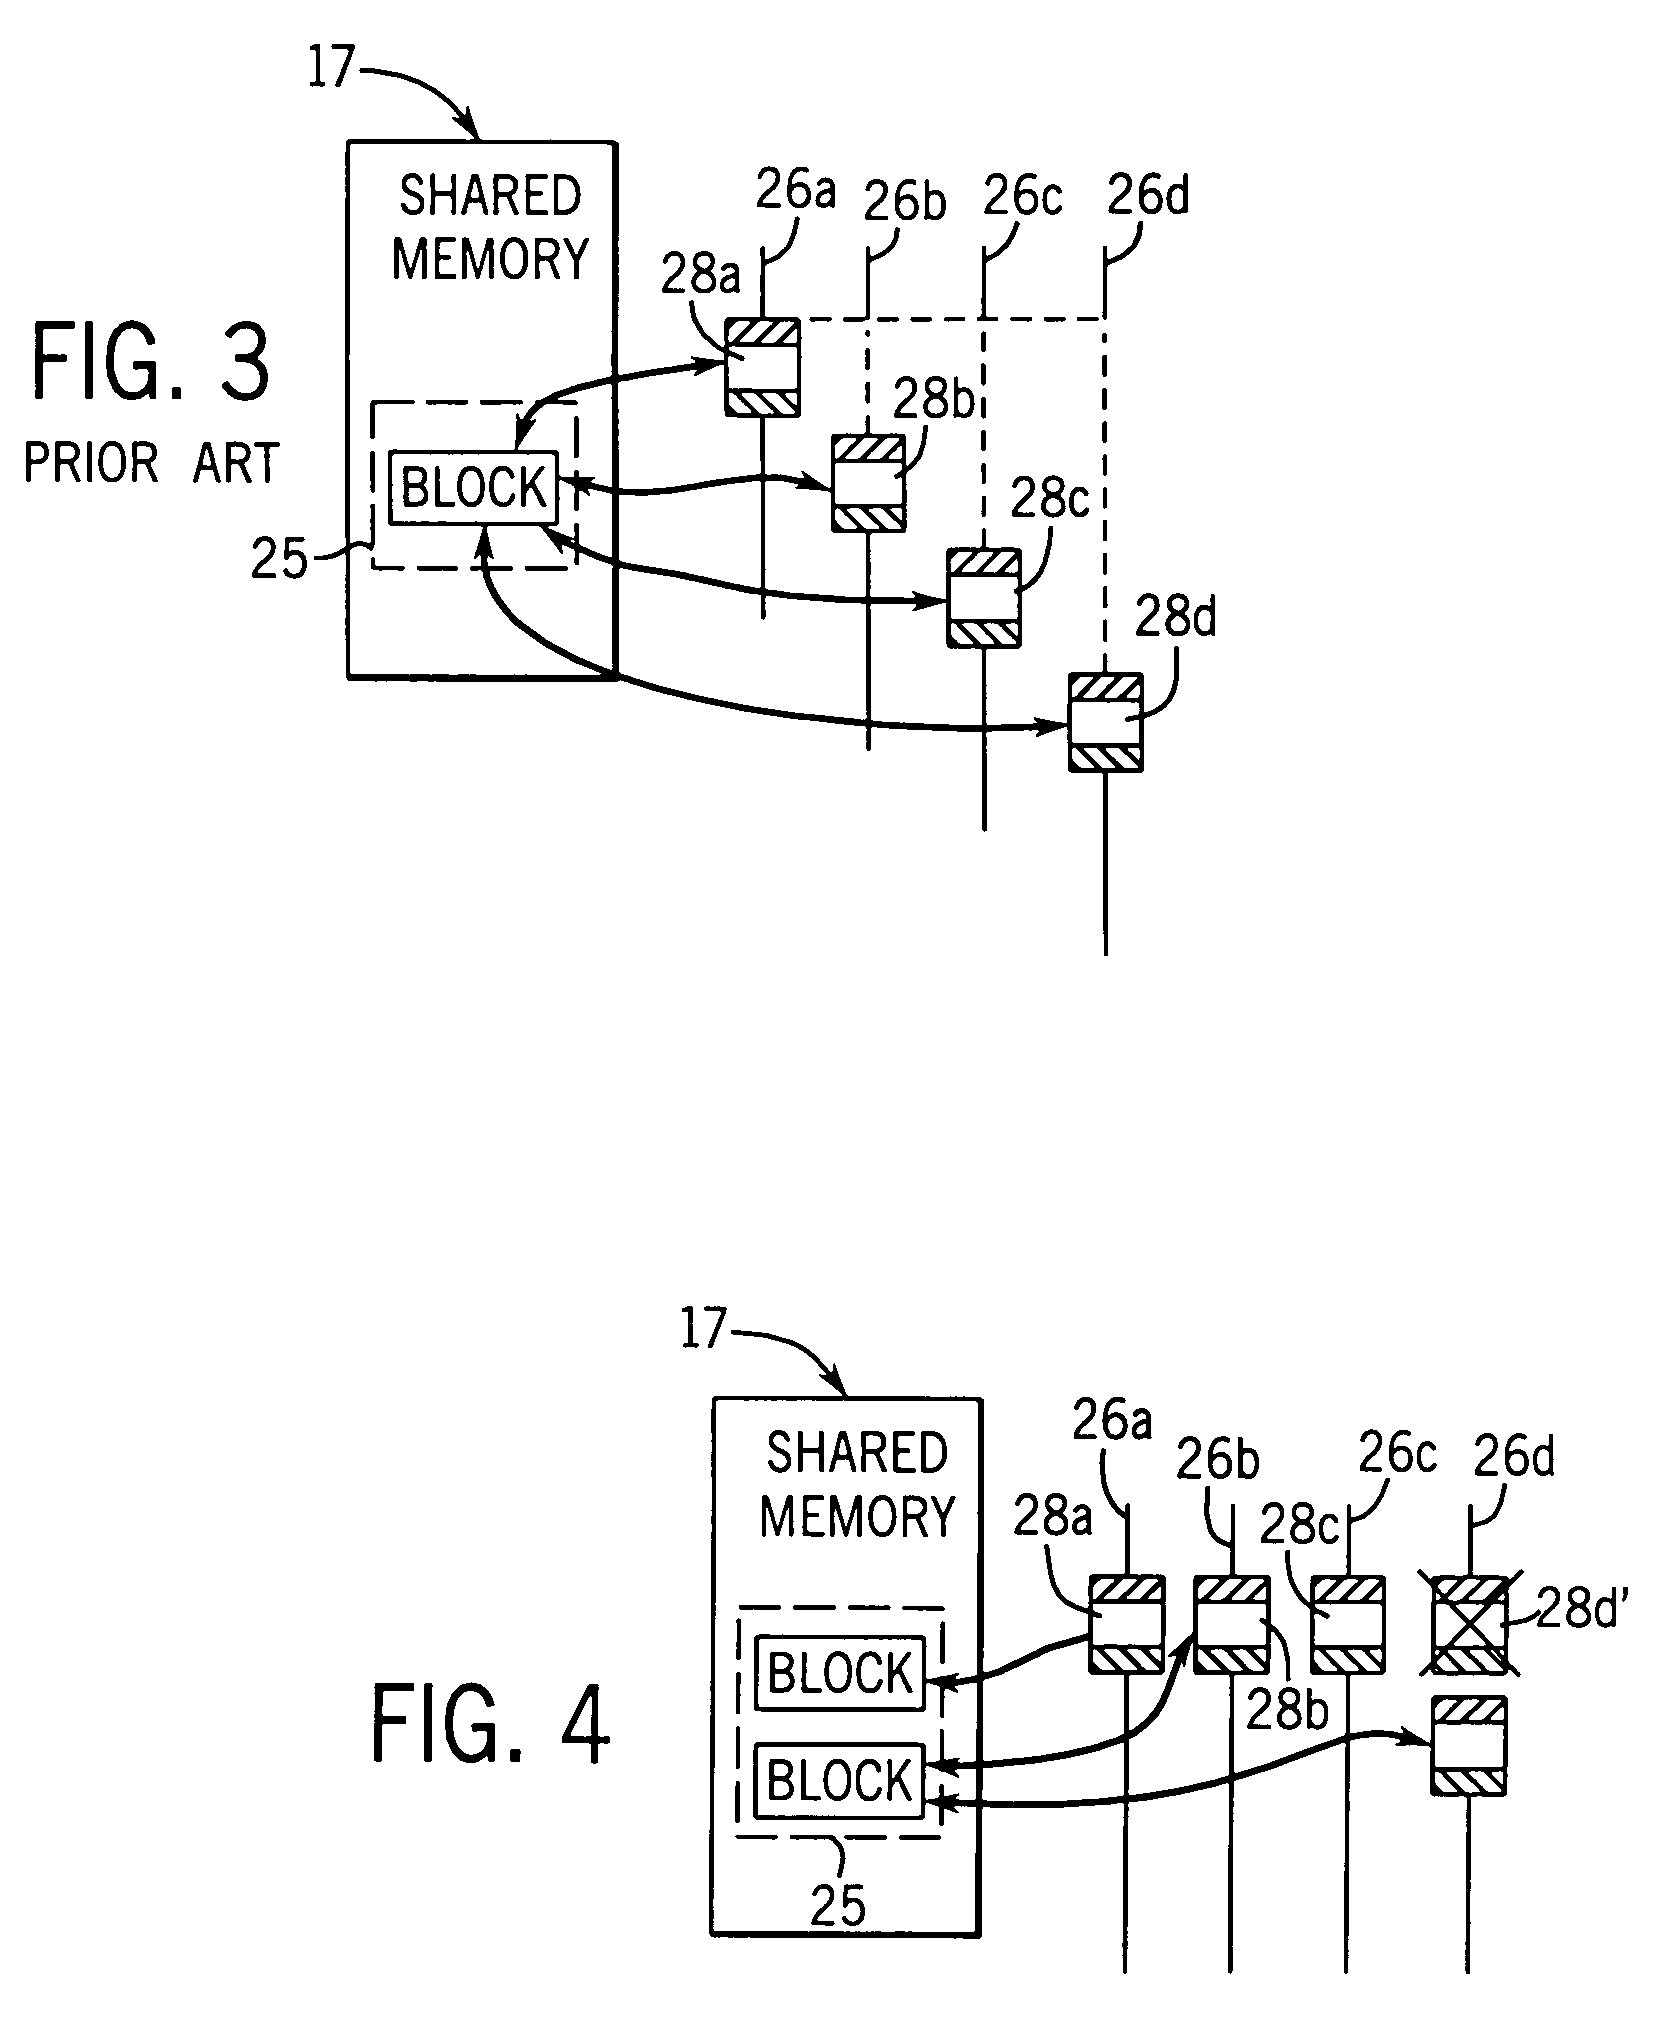 Concurrent execution of critical sections by eliding ownership of locks